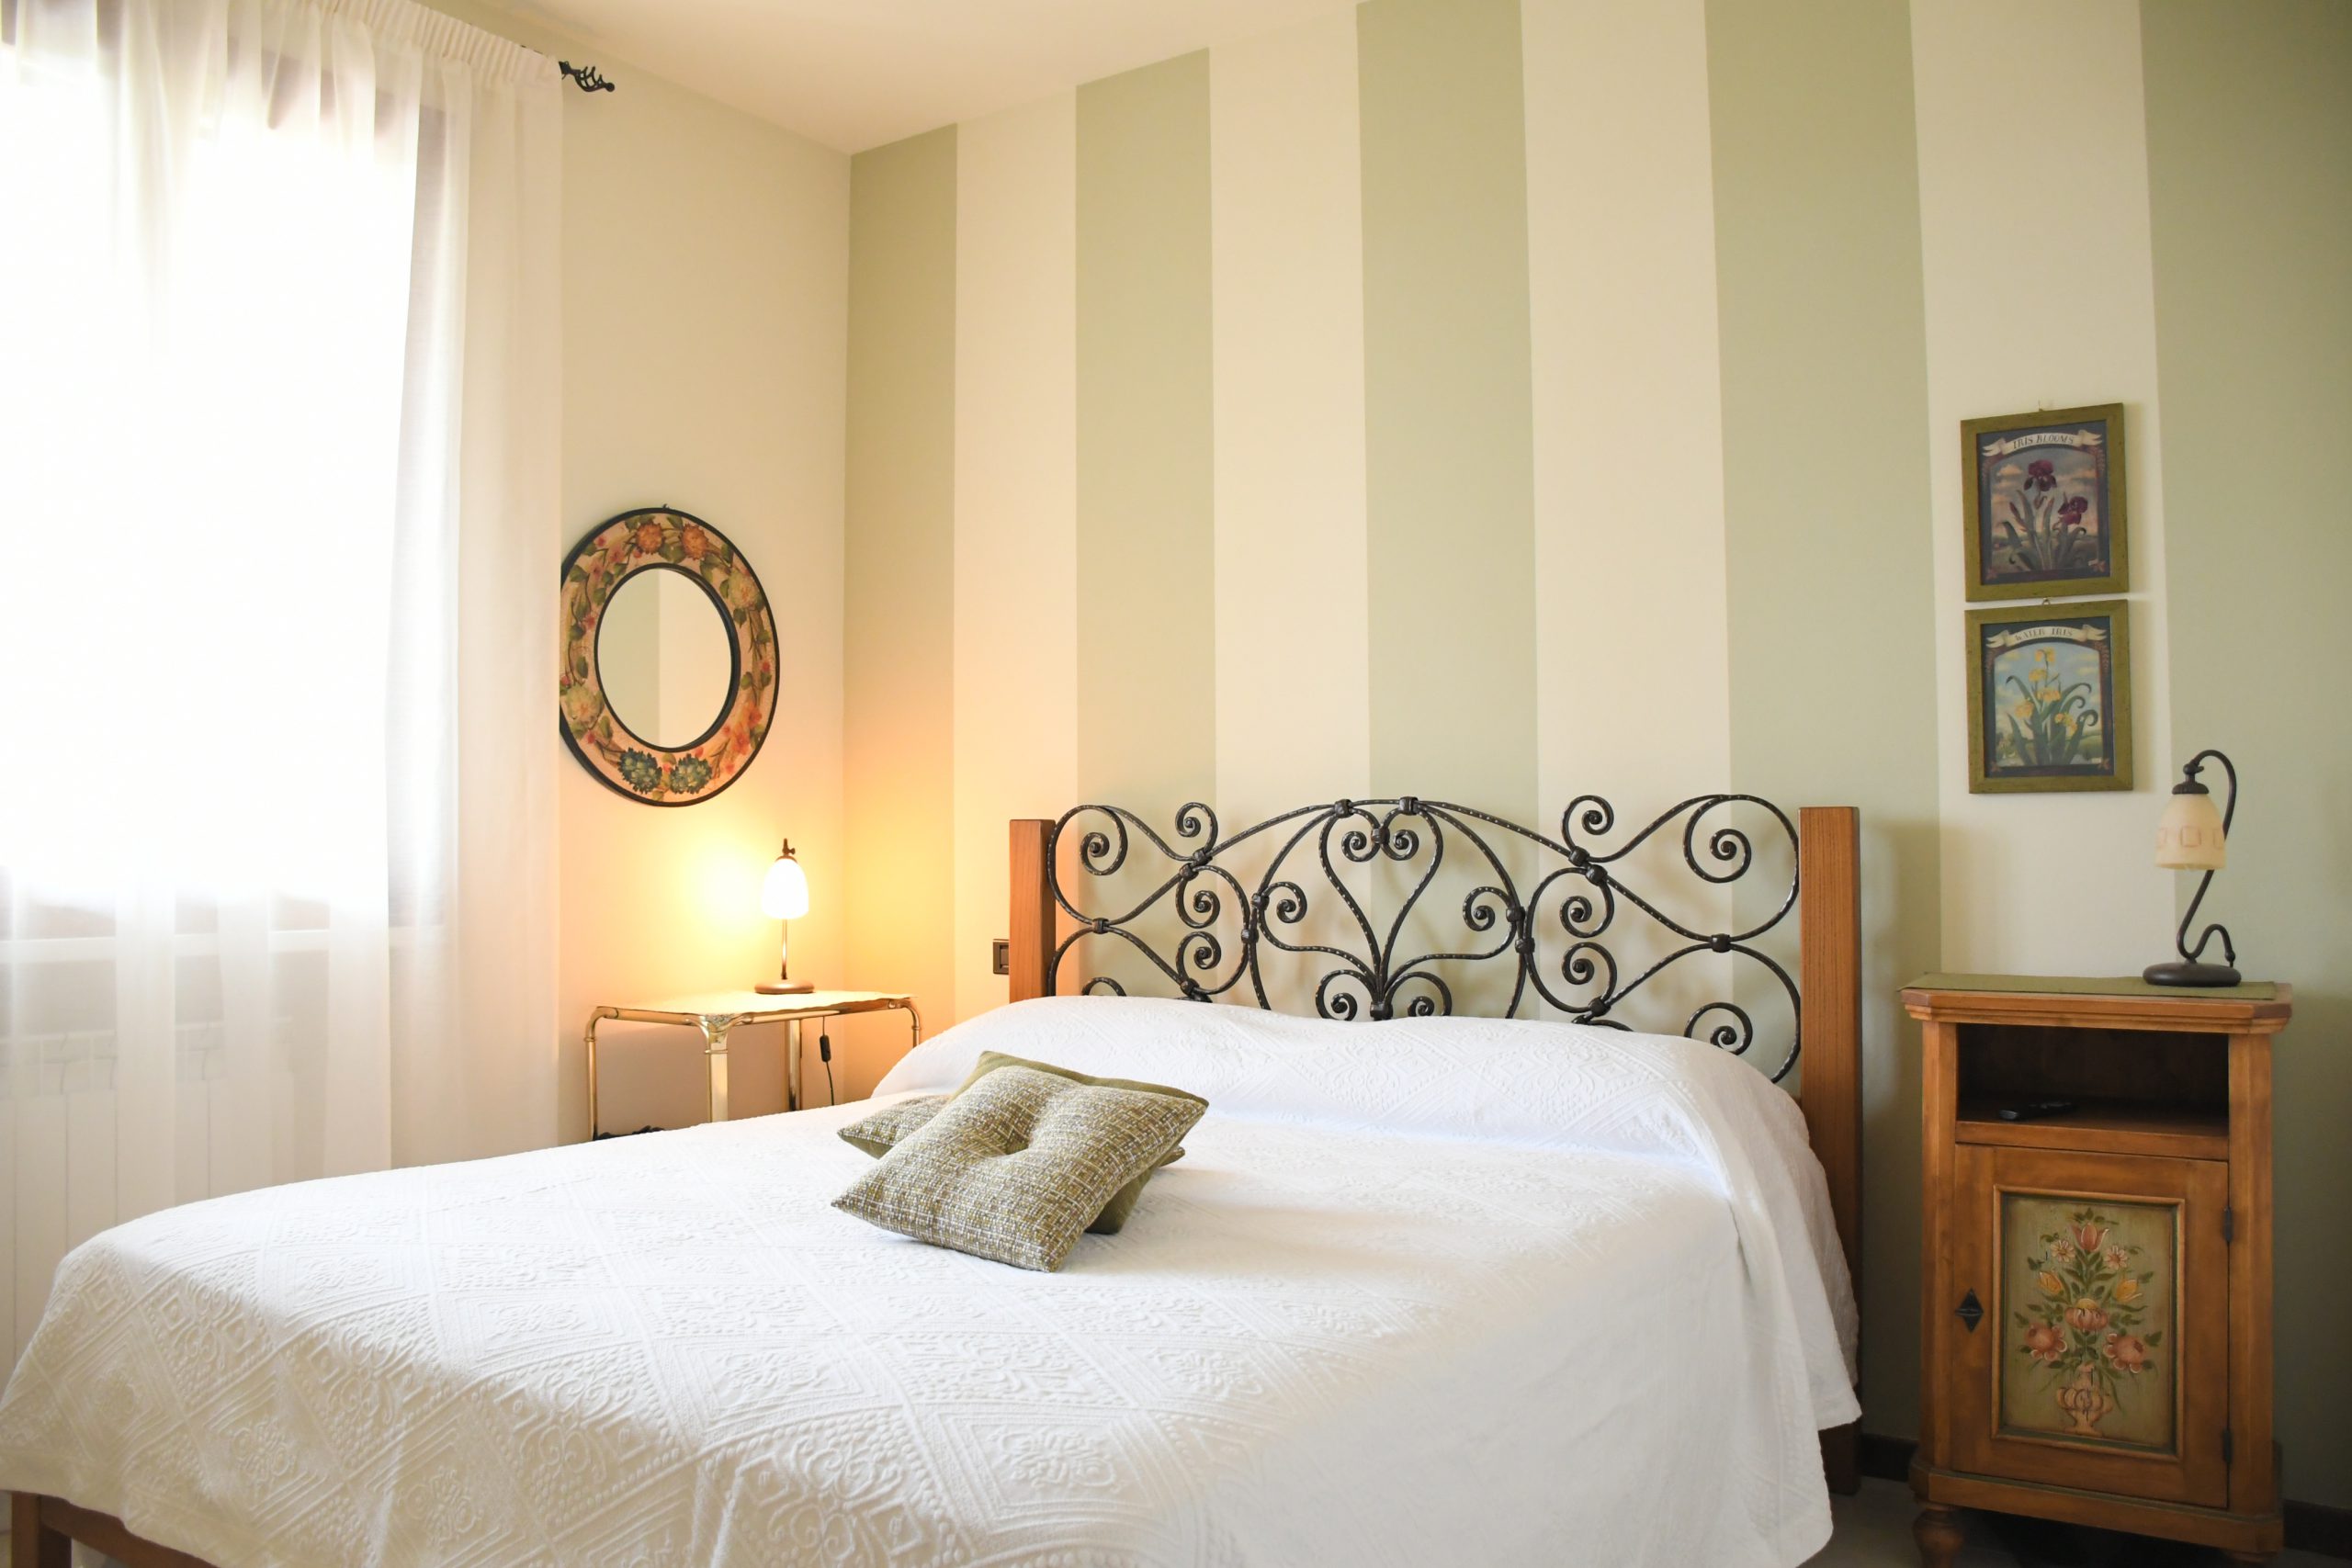 SIMONA'S HOME Apartment in Desenzano and Sirmione - Bedroom King size bed